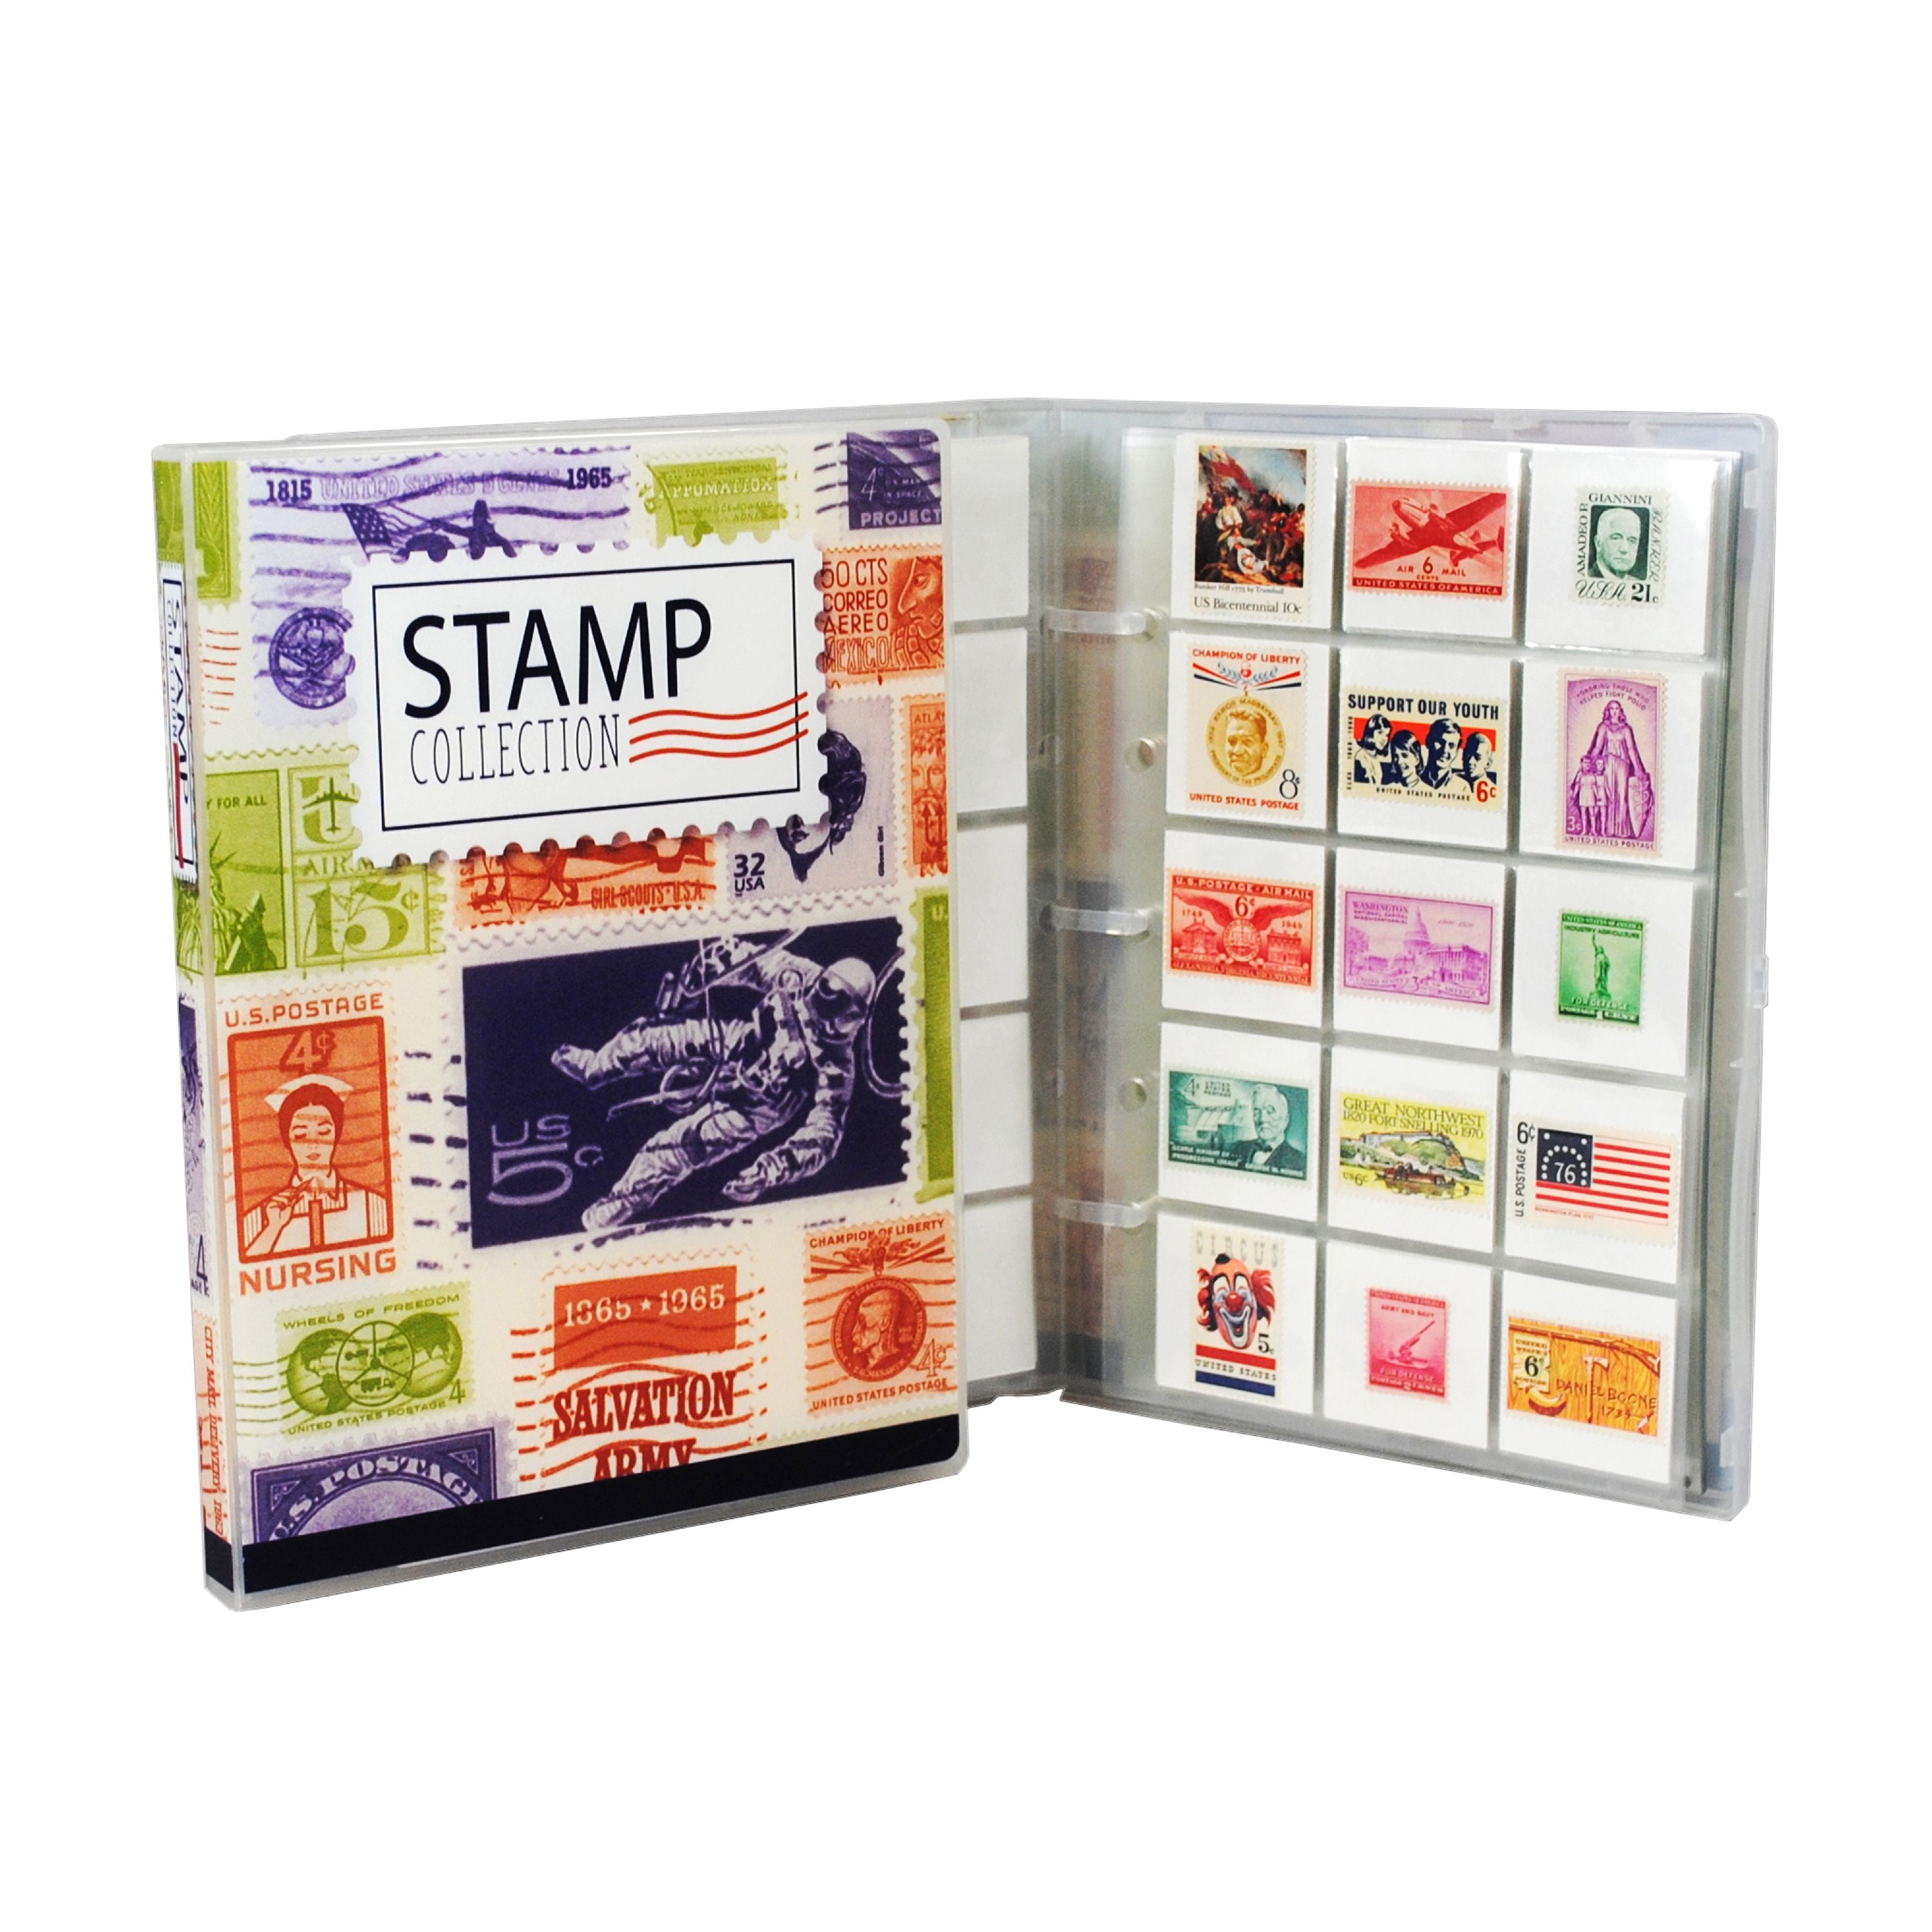 Stamp Album: Stamp Albums For Collectors - Stamp Coll by Prints,  Everyday Log